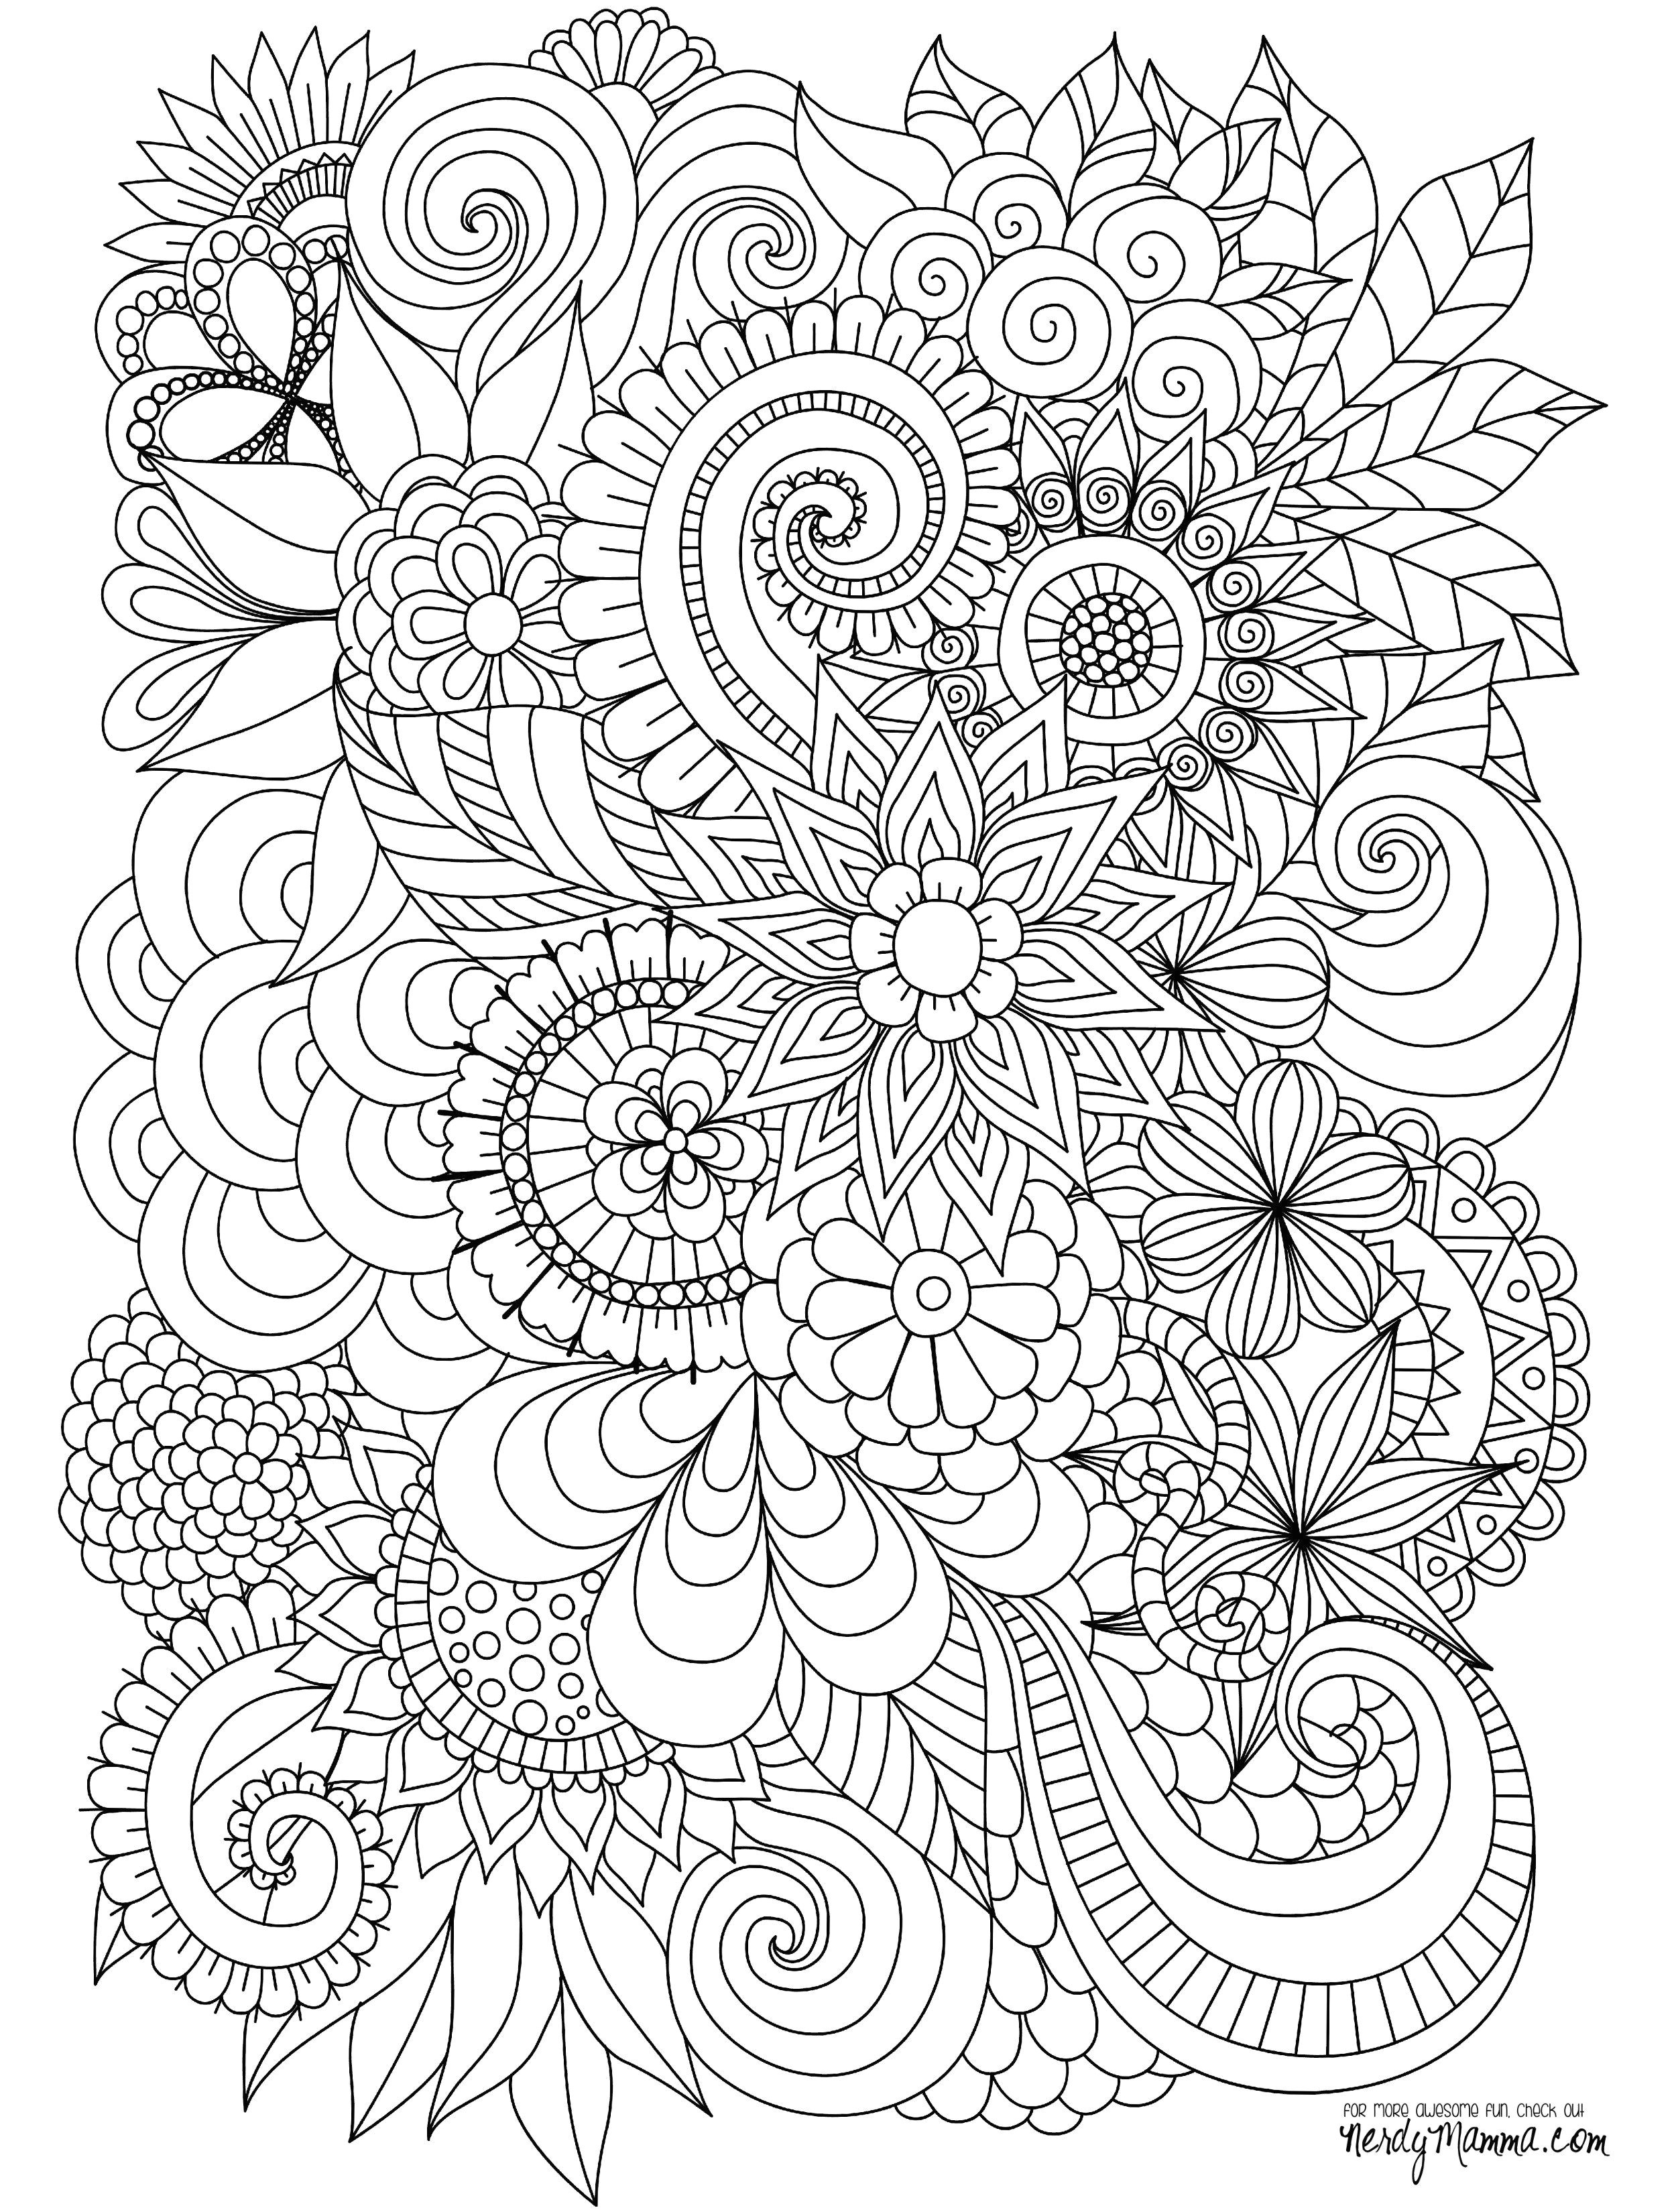 Drawings Of Flowers for Coloring Flowers Abstract Coloring Pages Colouring Adult Detailed Advanced